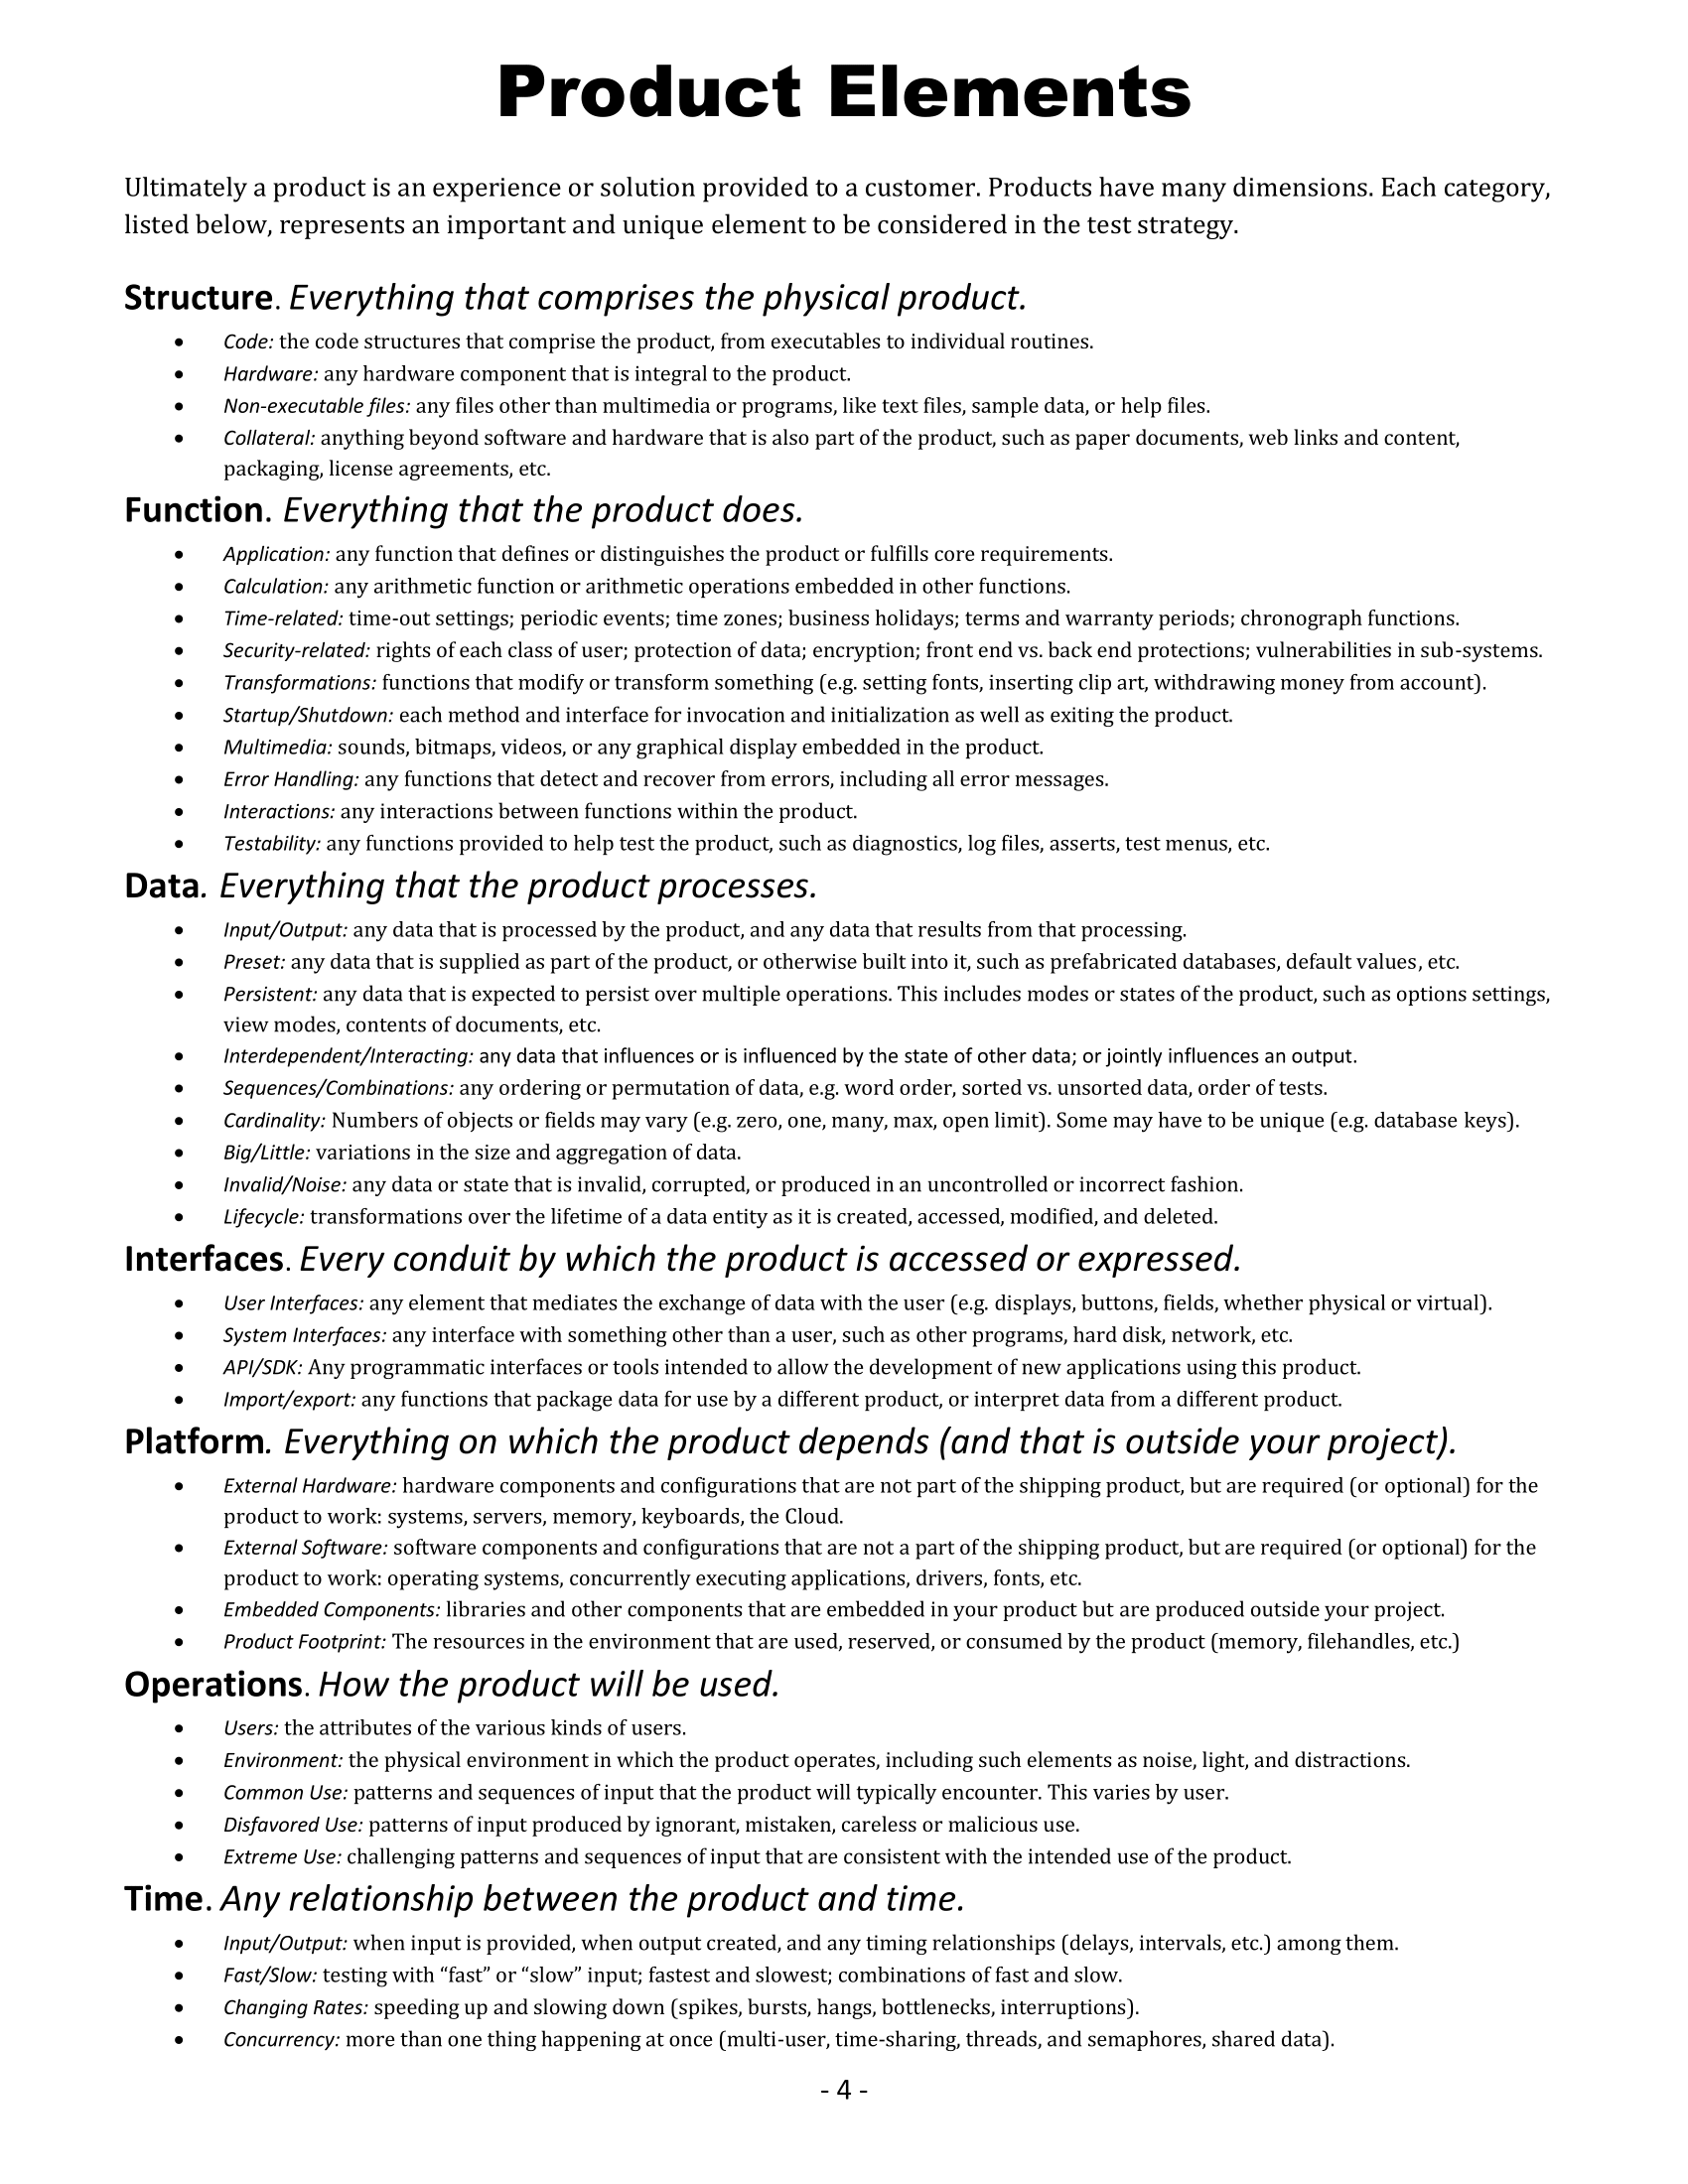 List of Product Elements from the Heuristic Test Strategy Model (p.4)